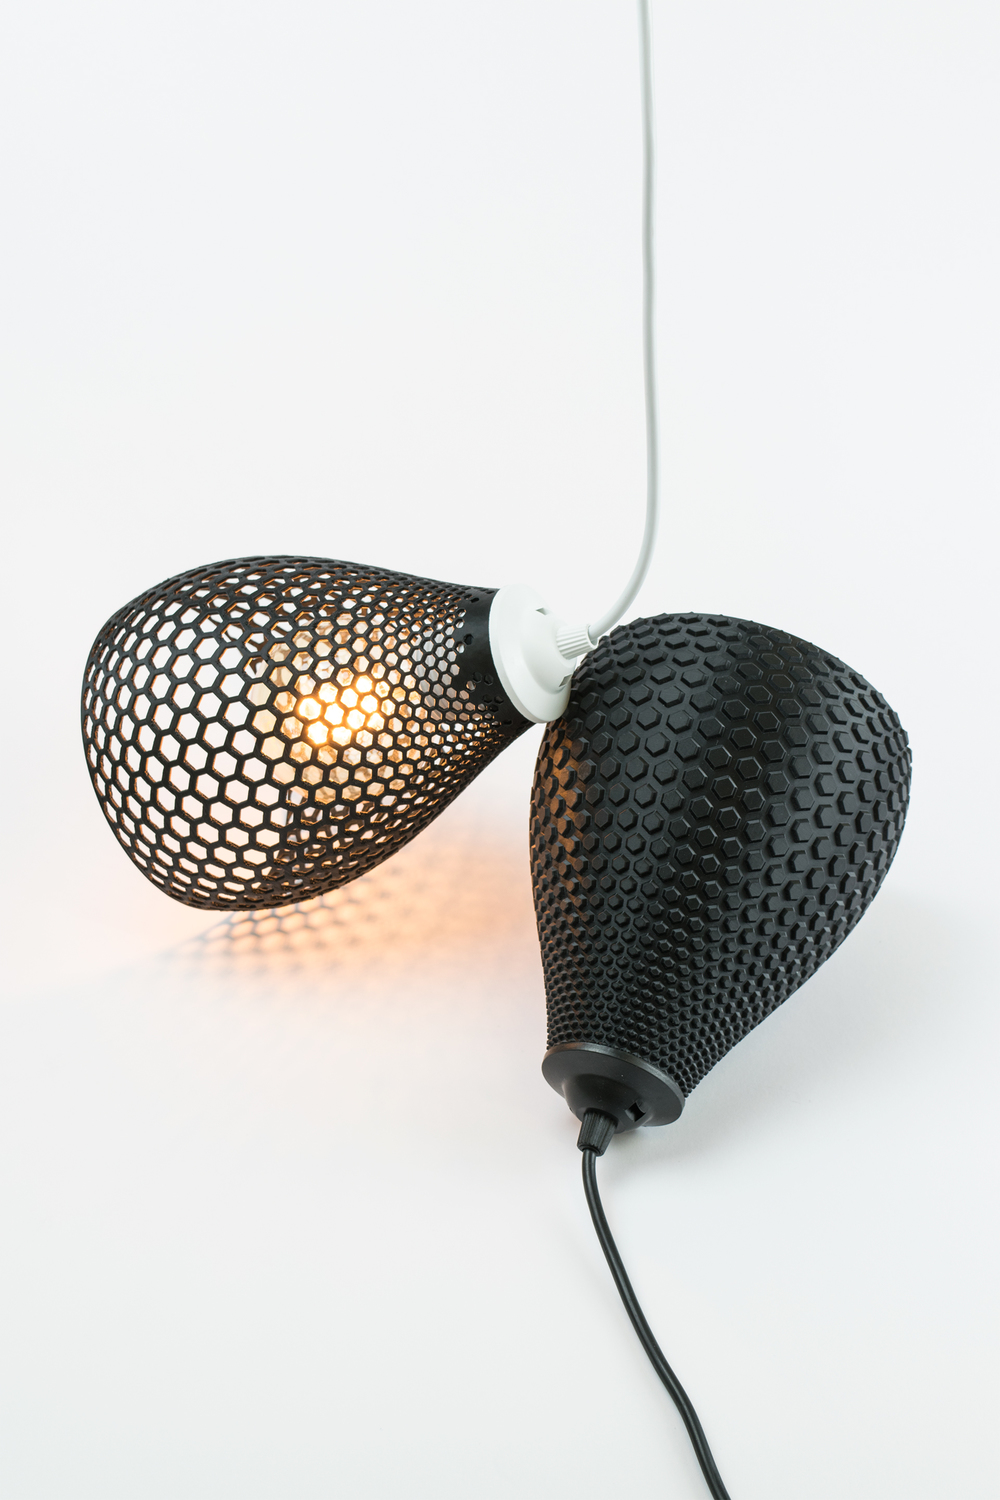 LampiON Lamps by Voood